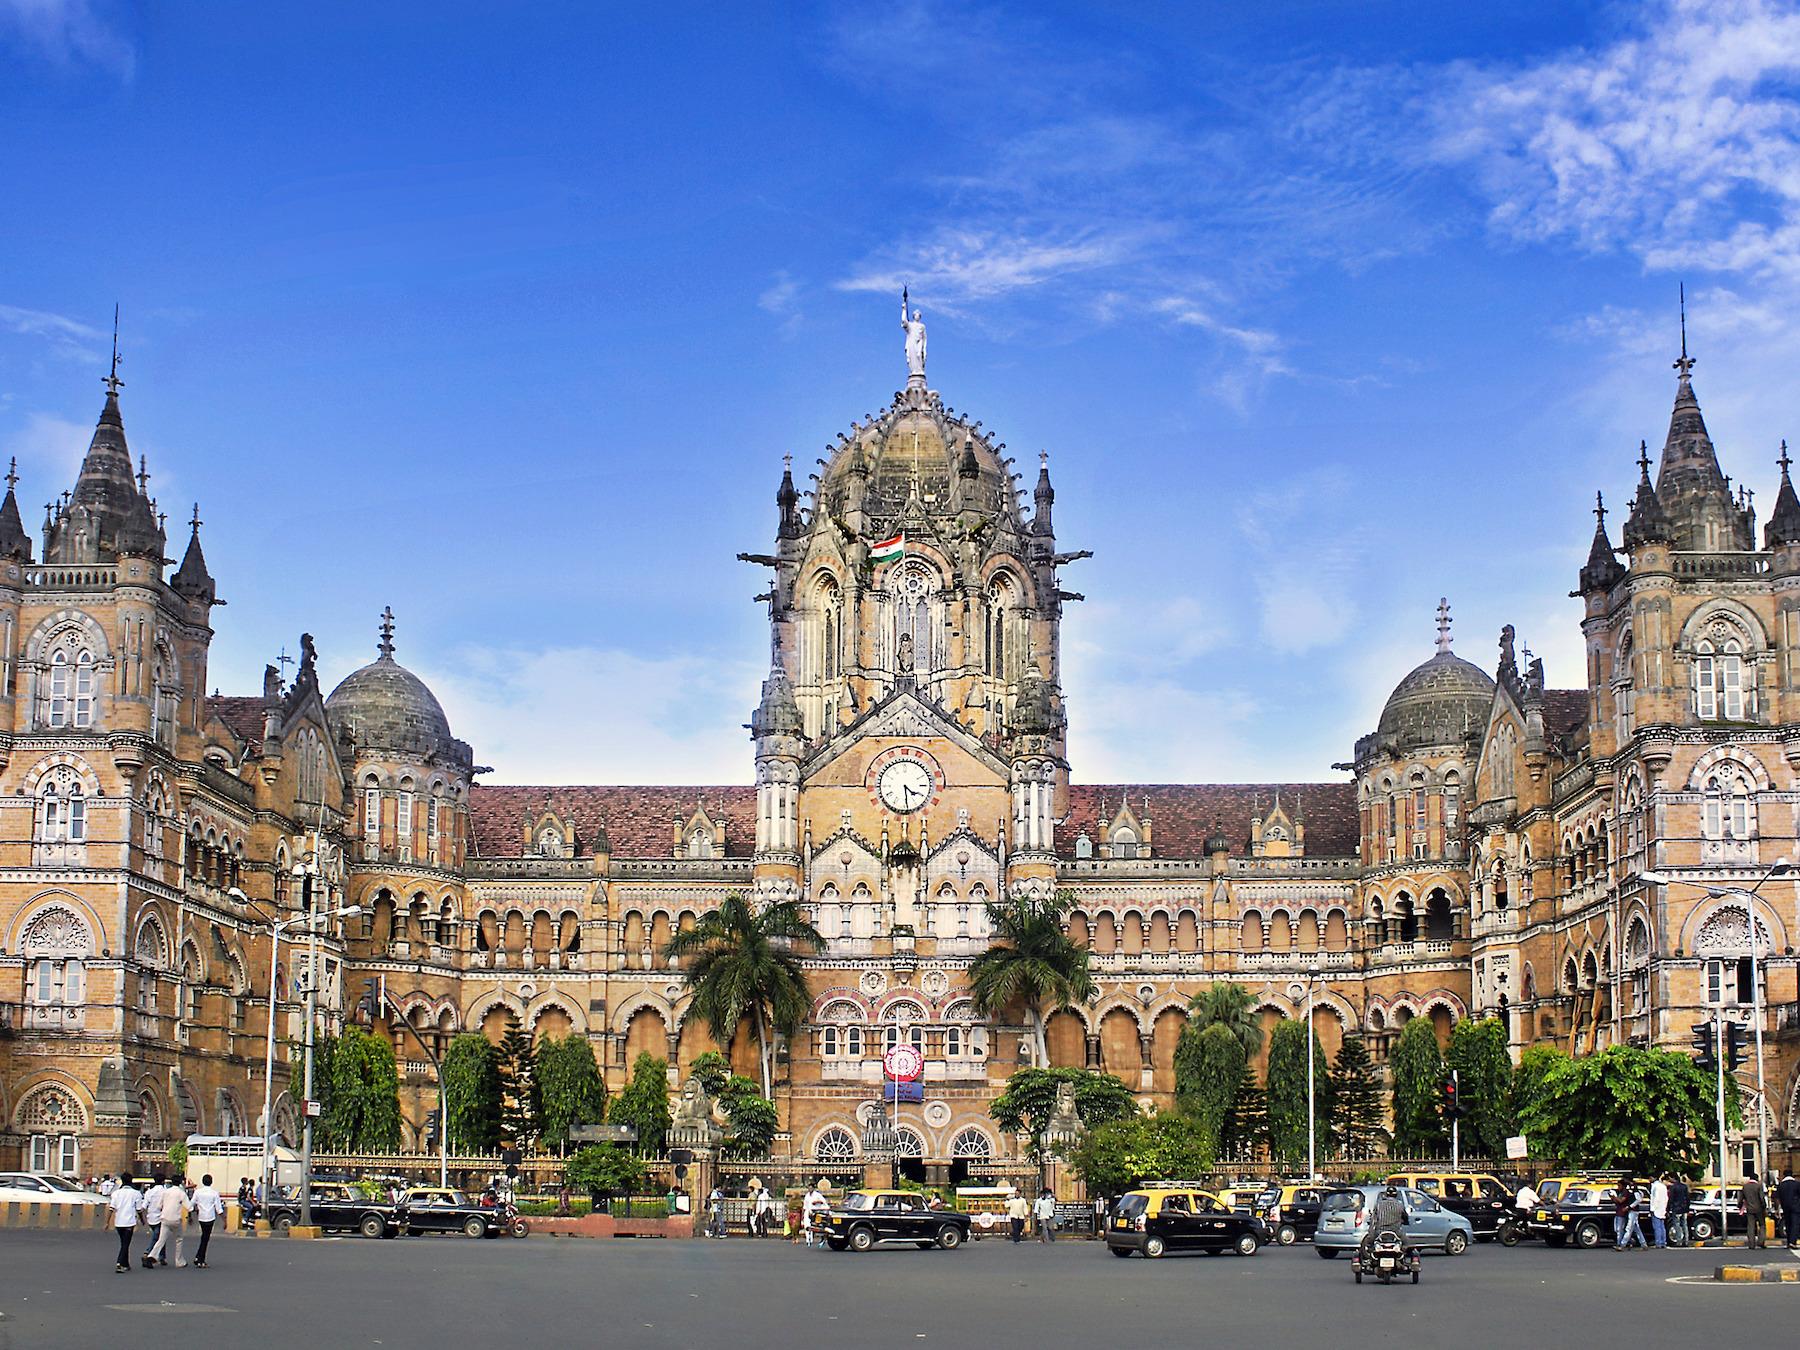 A Design Lover's Guide to Mumbai: Part One